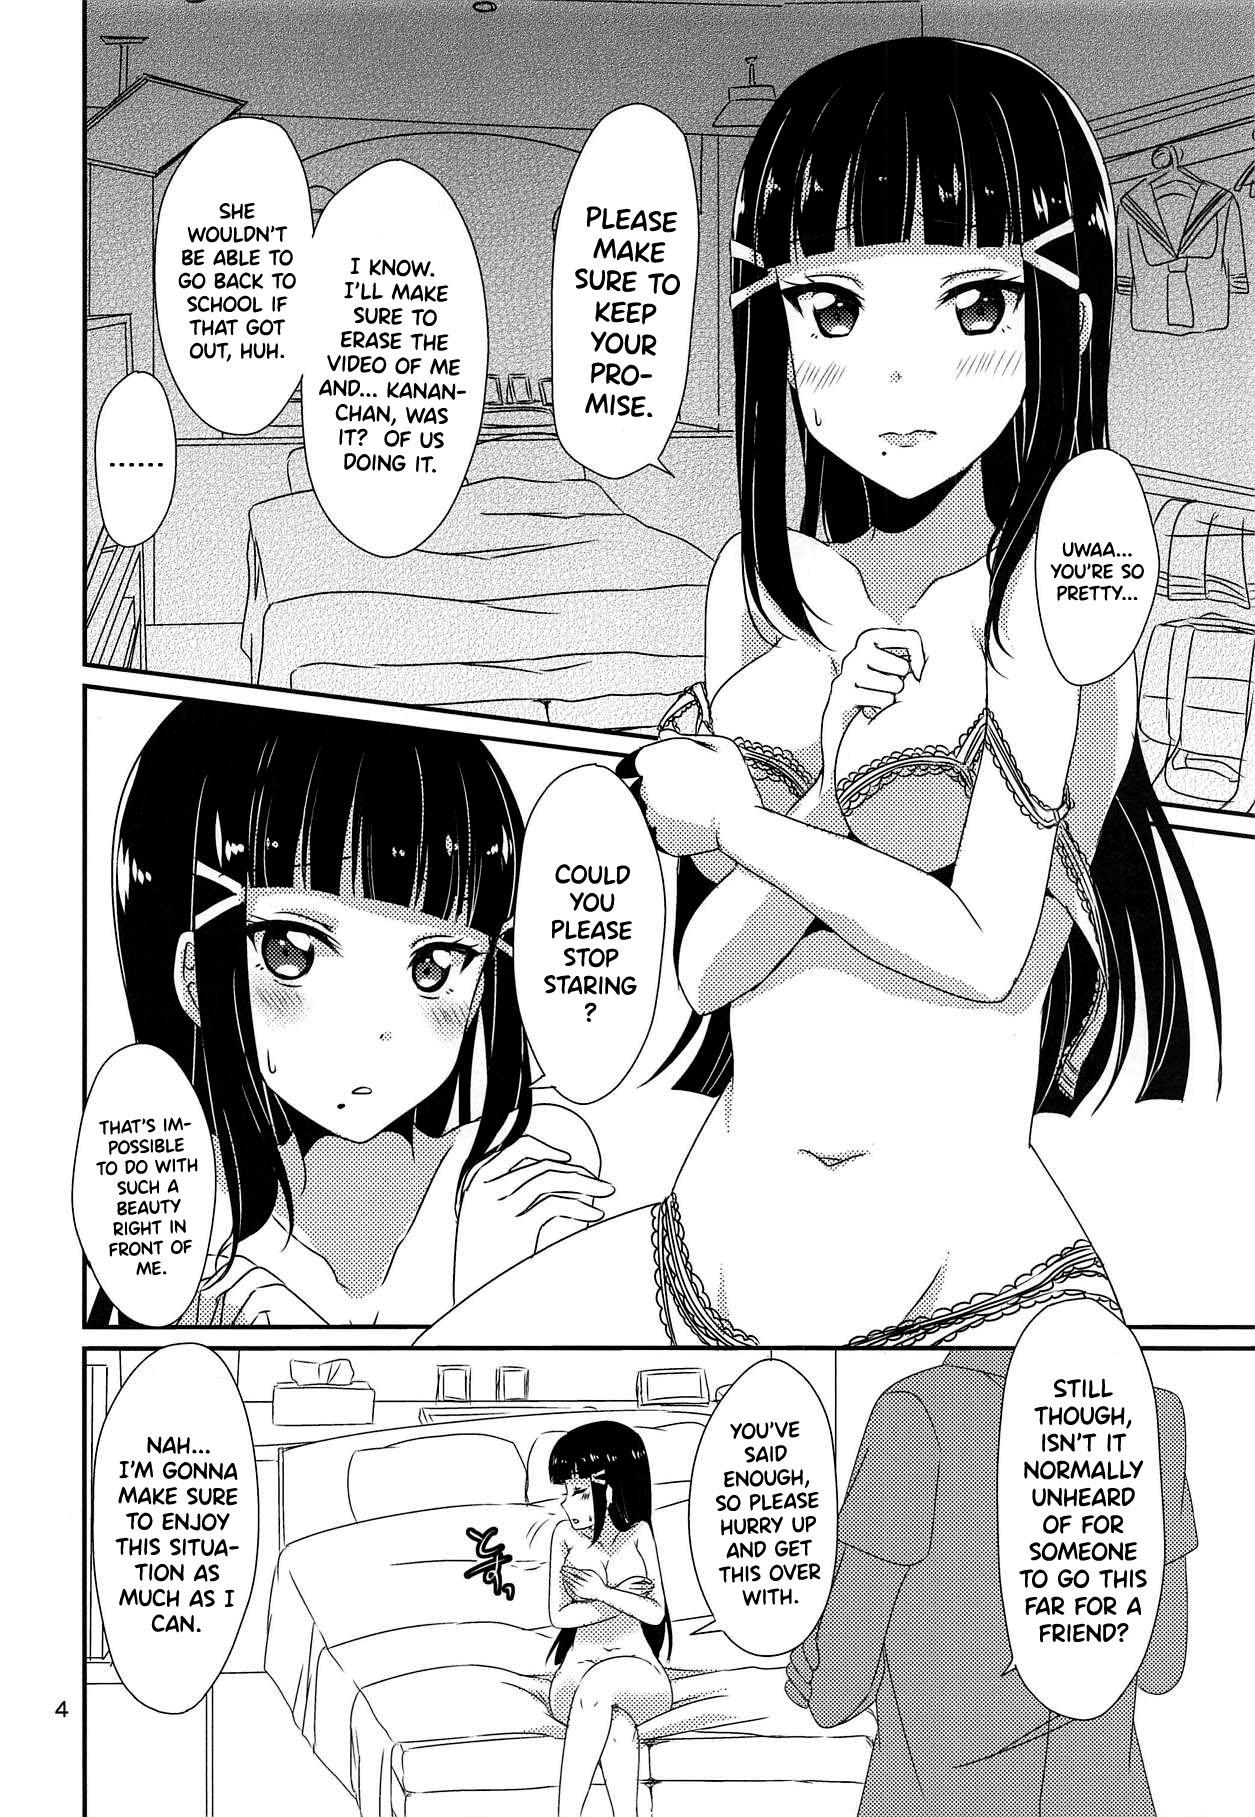 Free Rough Porn MY Wai TONIGHT - Love live sunshine Pigtails - Page 5